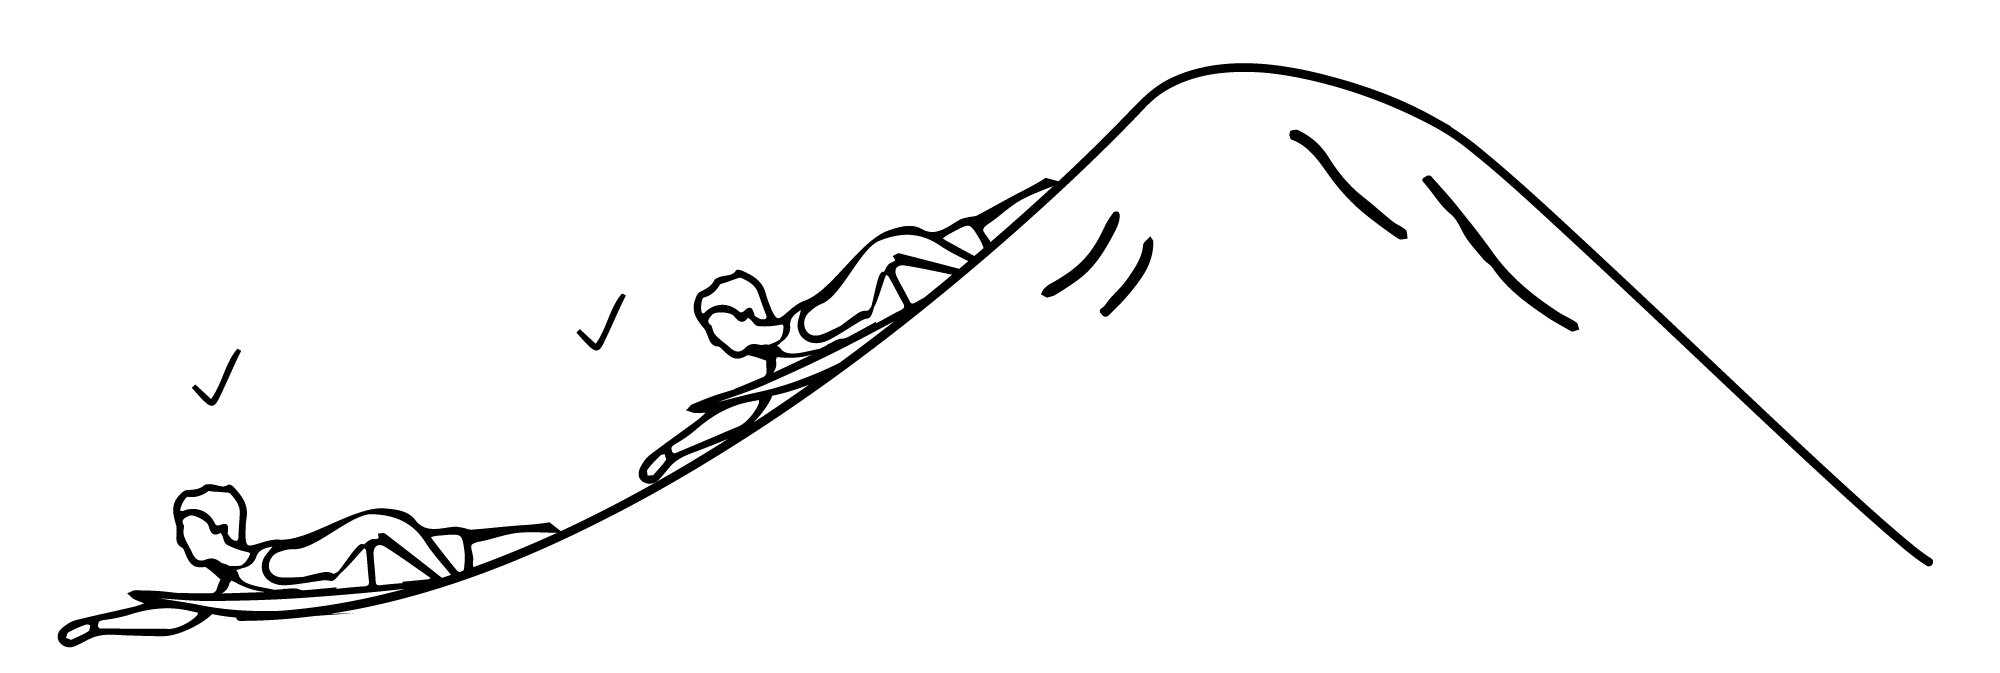 Illustration Right Position on a Wave